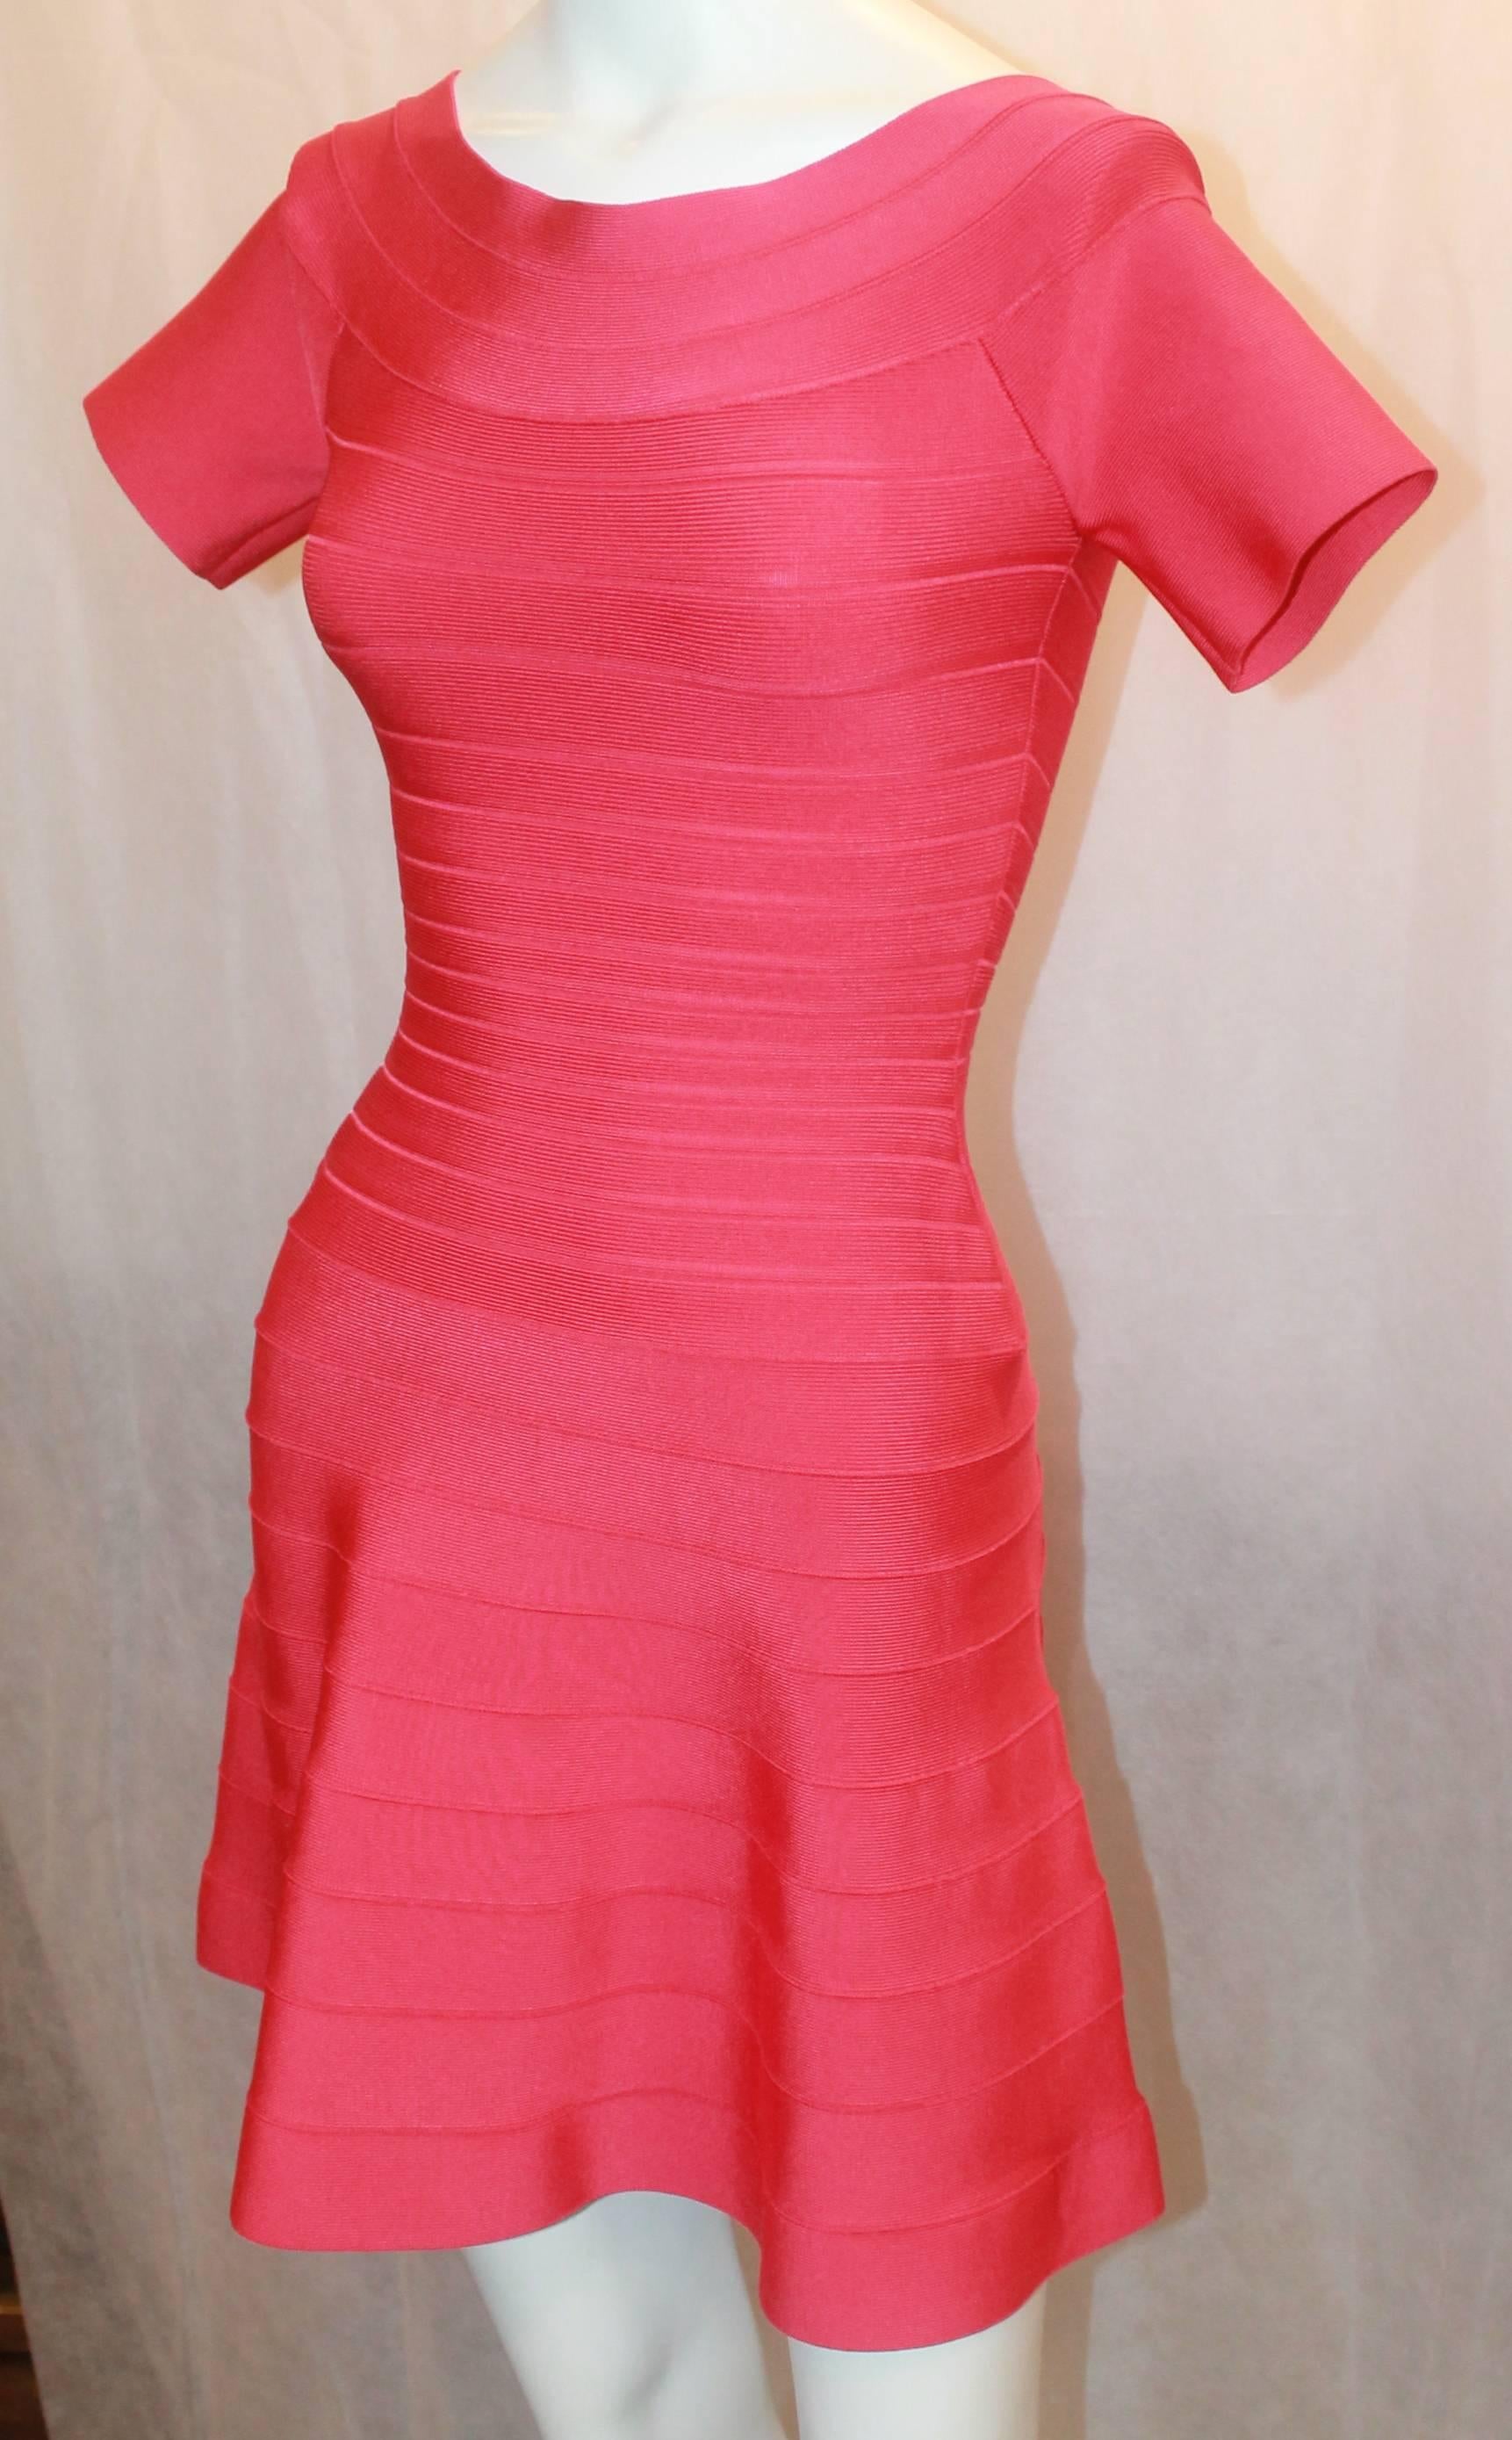 Herve Leger Raspberry Stretch Short Sleeve Dress - XS. This dress is in impeccable condition and is perfect for a night out. The neck has a round look and the skirt on the bottom flares out. The dress also has the pleated look all